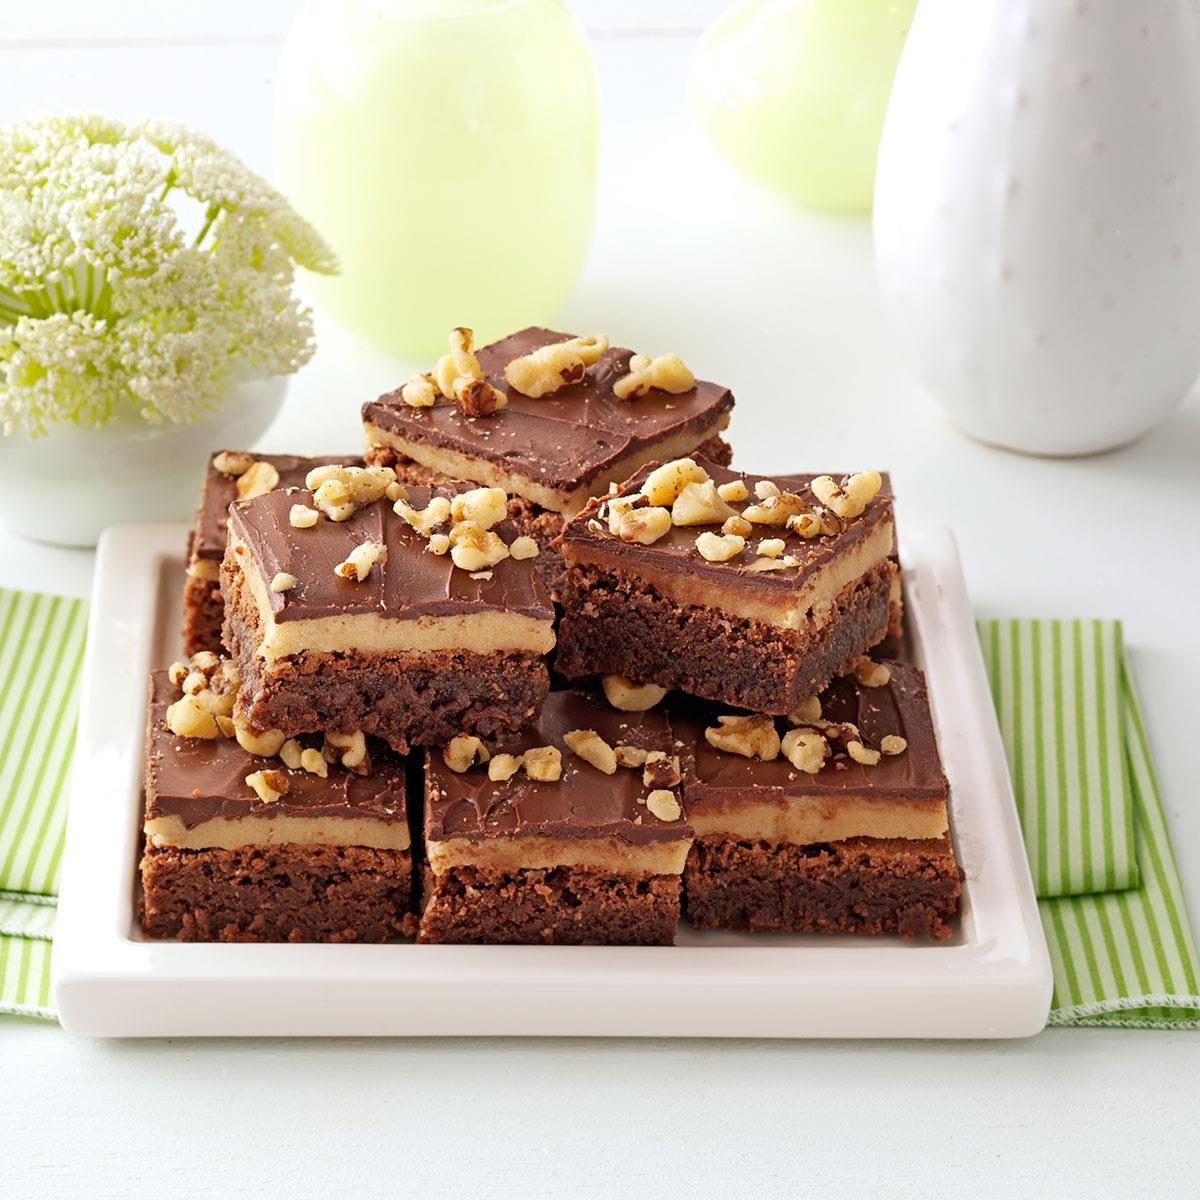 https://www.tasteofhome.com/wp-content/uploads/2018/01/Cookie-Dough-Brownies_exps1310_BSF2679079C06_15_8bC_RMS-2.jpg?fit=700%2C1024